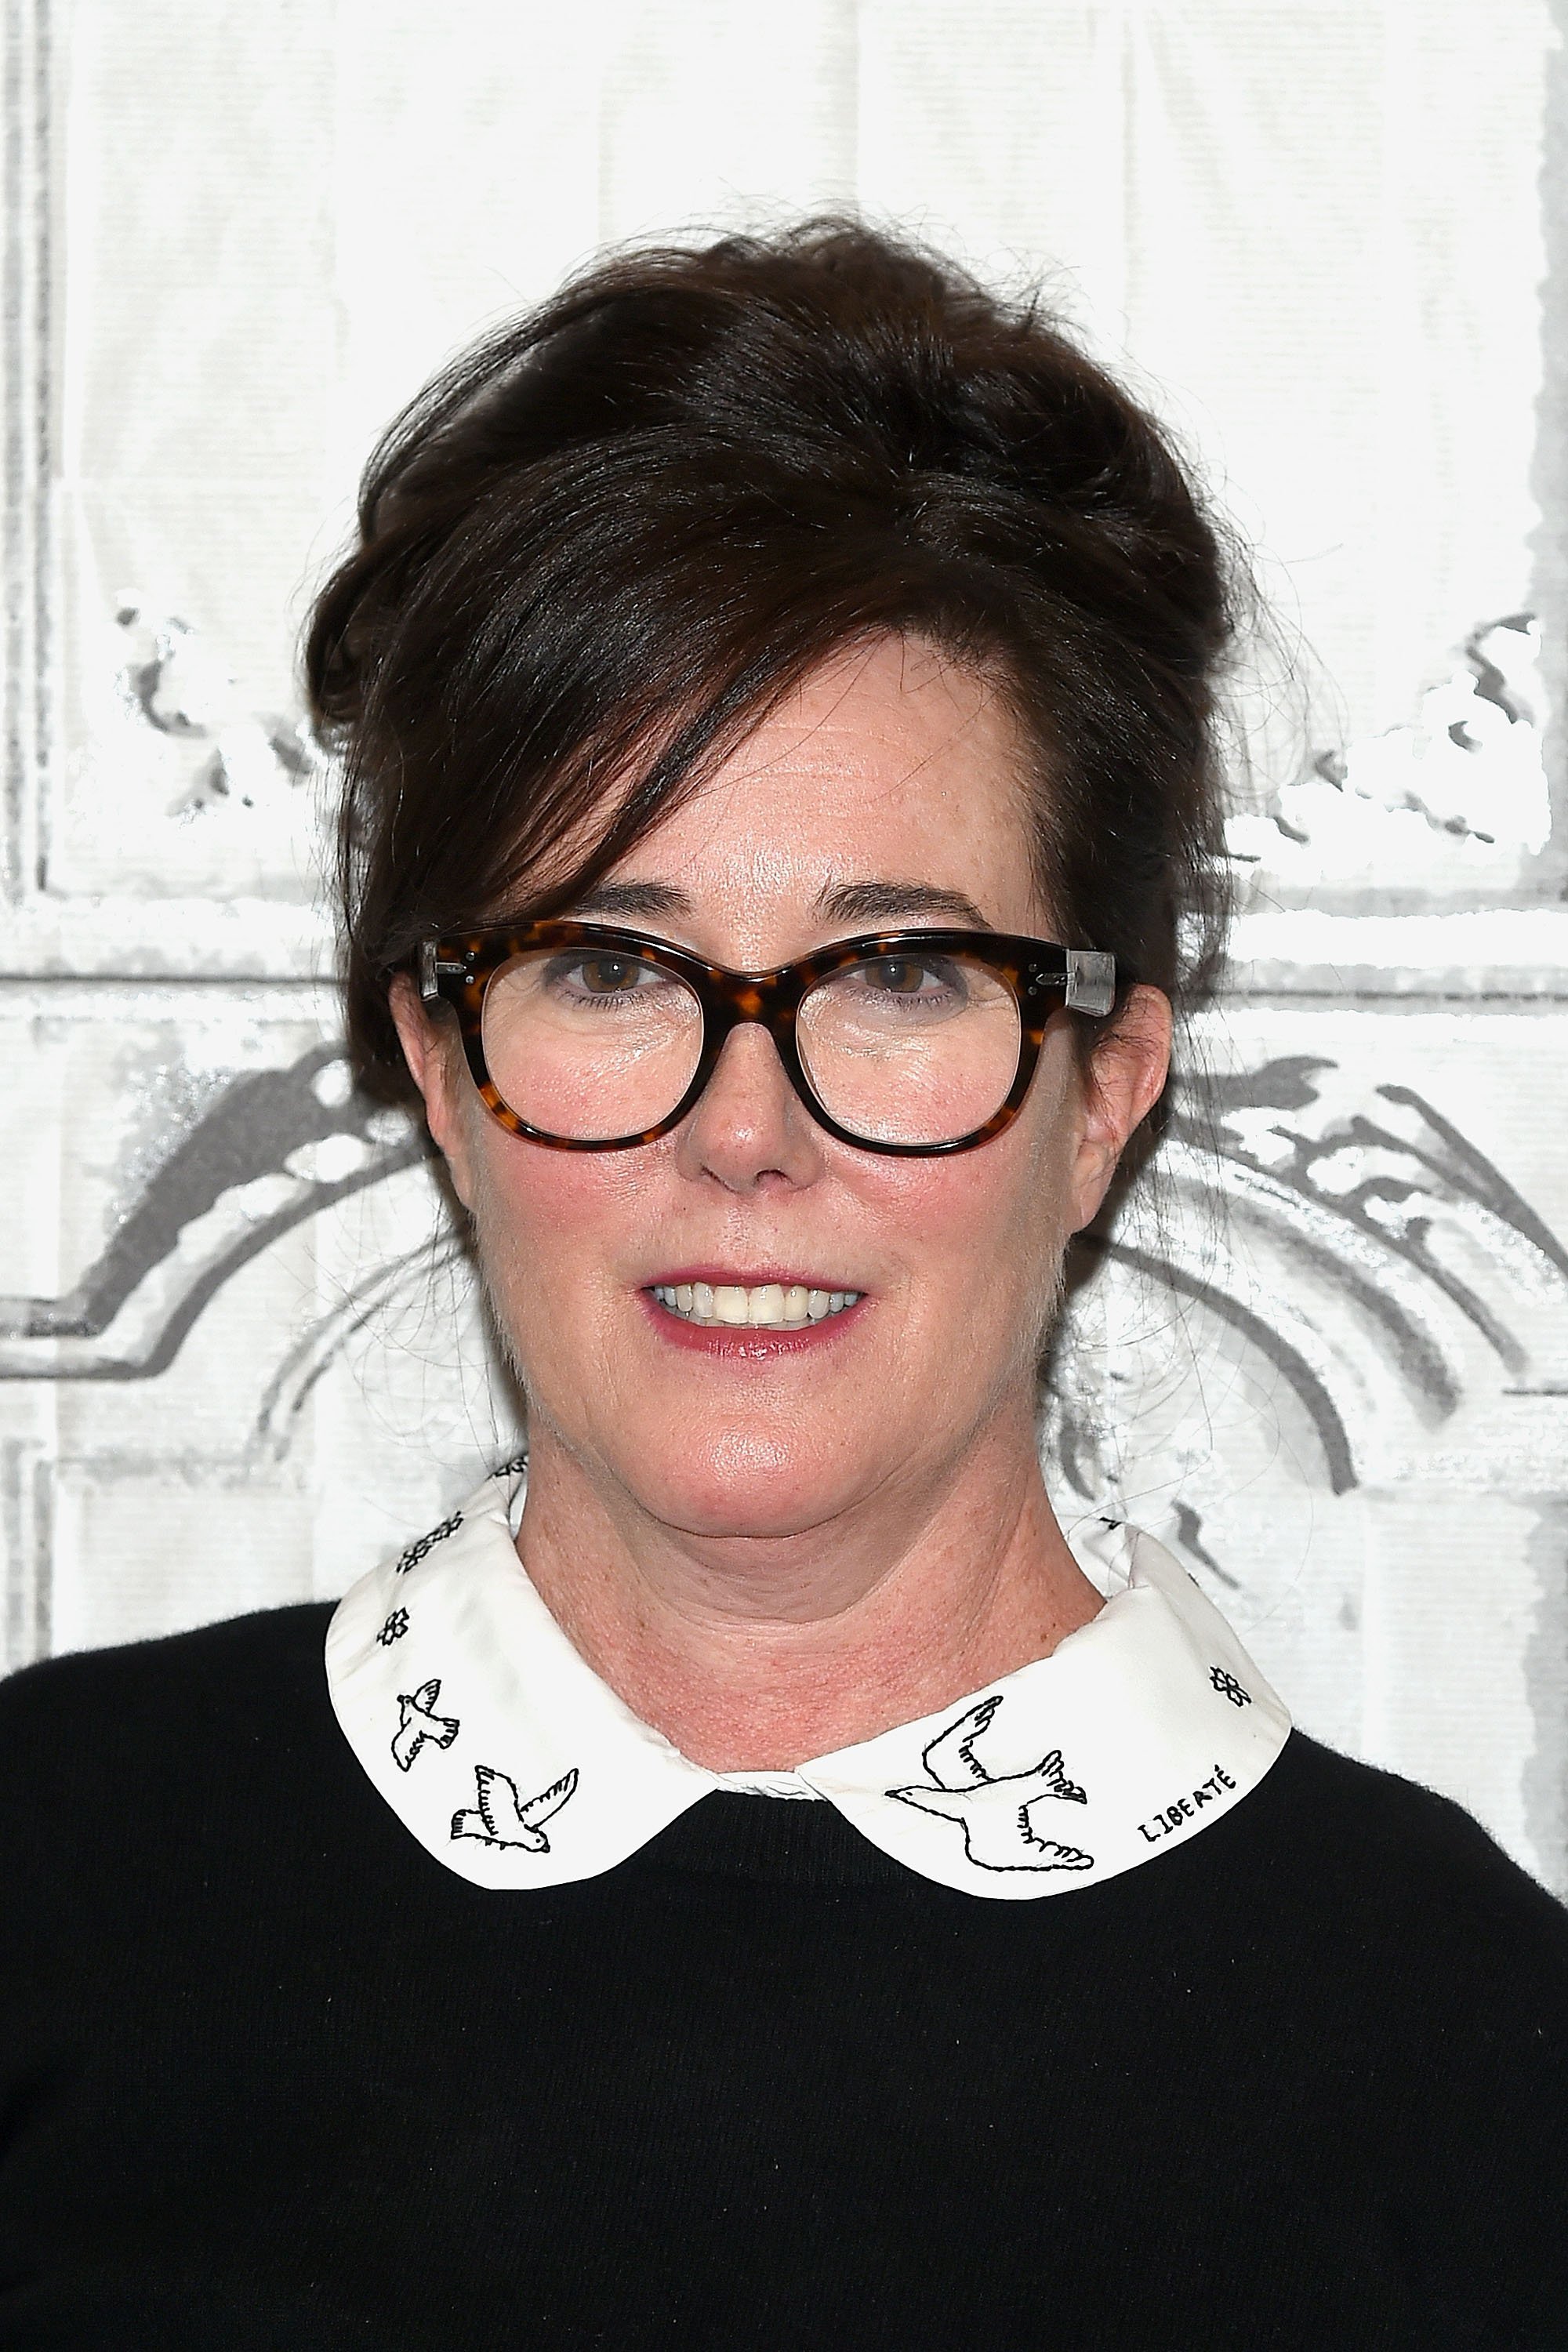 Designer Kate Spade attends the Build Series at Build Studio on April 28, 2017 in New York City. | Photo: GettyImages